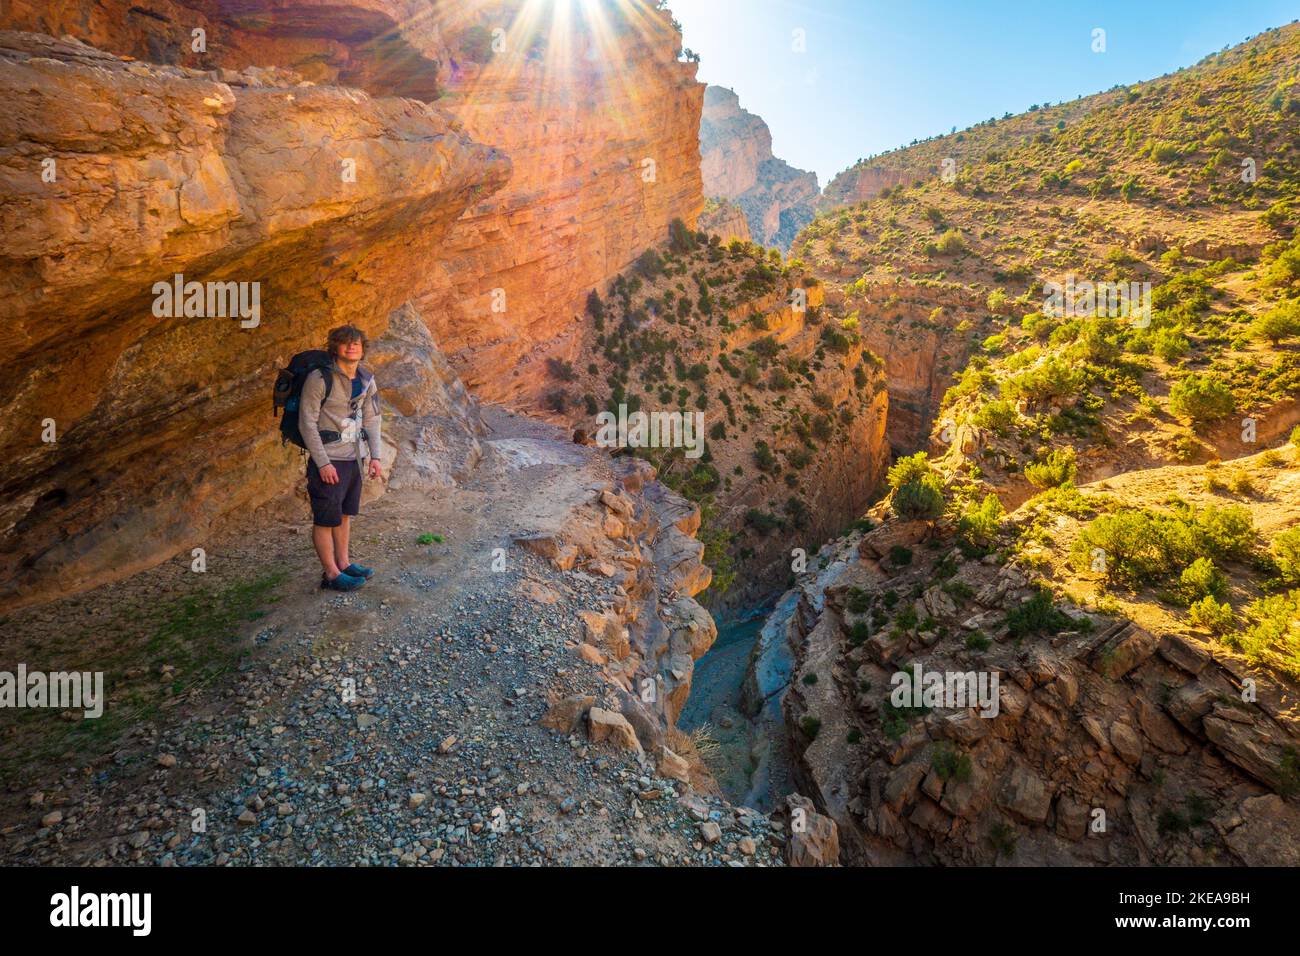 A trekker on a man made stairway up the canyon side of the M'Goun Gorge in the Atlas mountains of Morocco Stock Photo